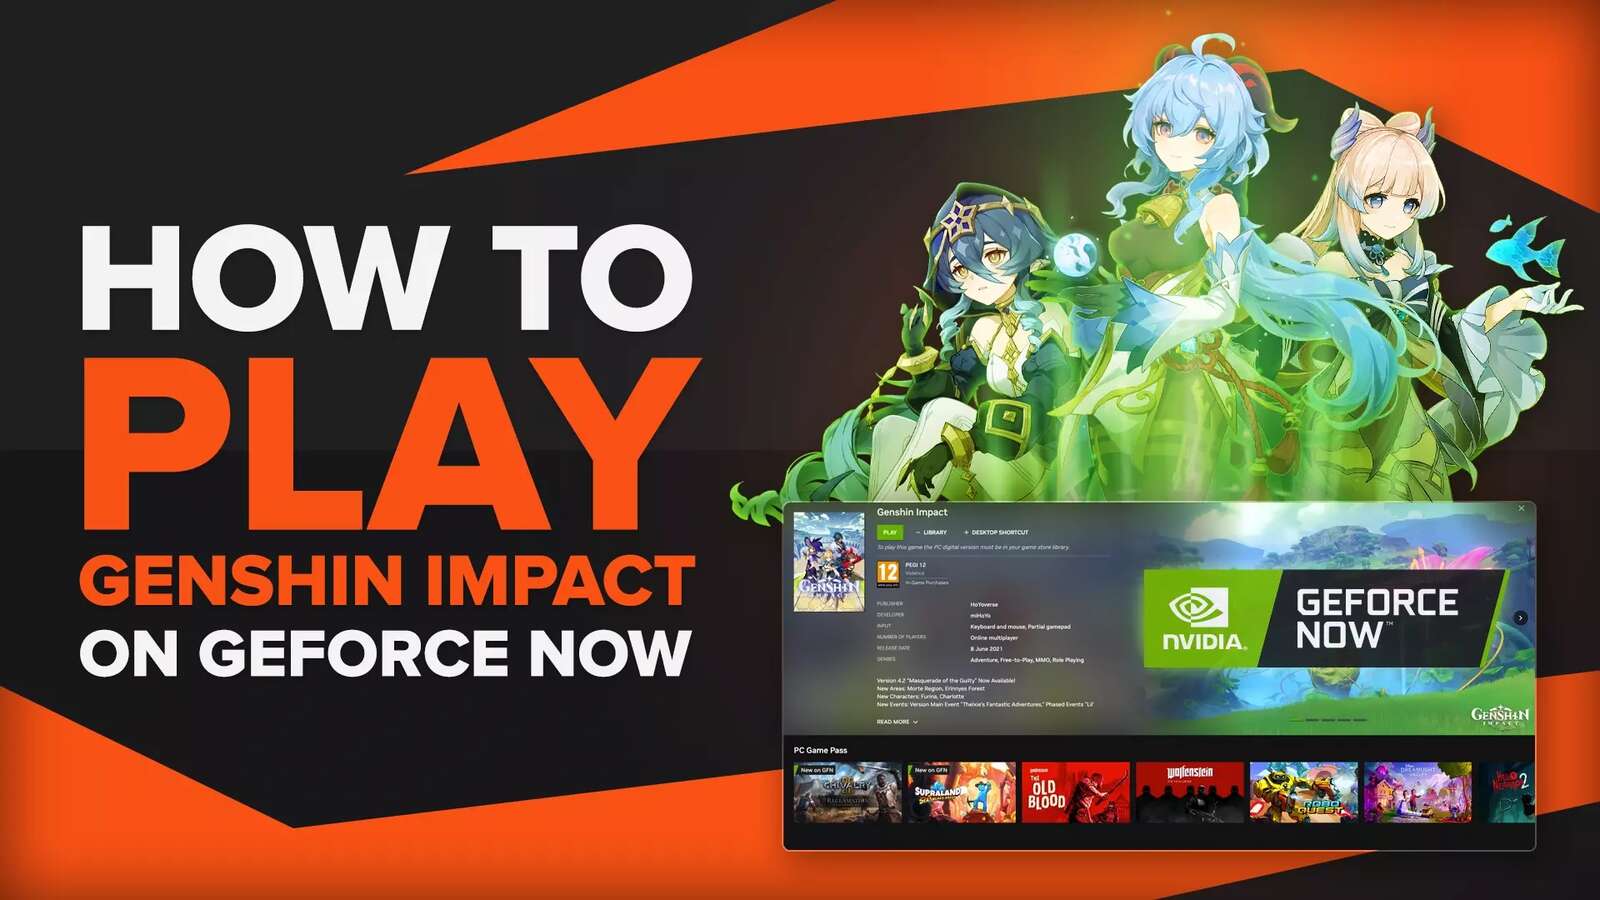 How to Play Genshin Impact on GeForce Now [Visualized Steps]